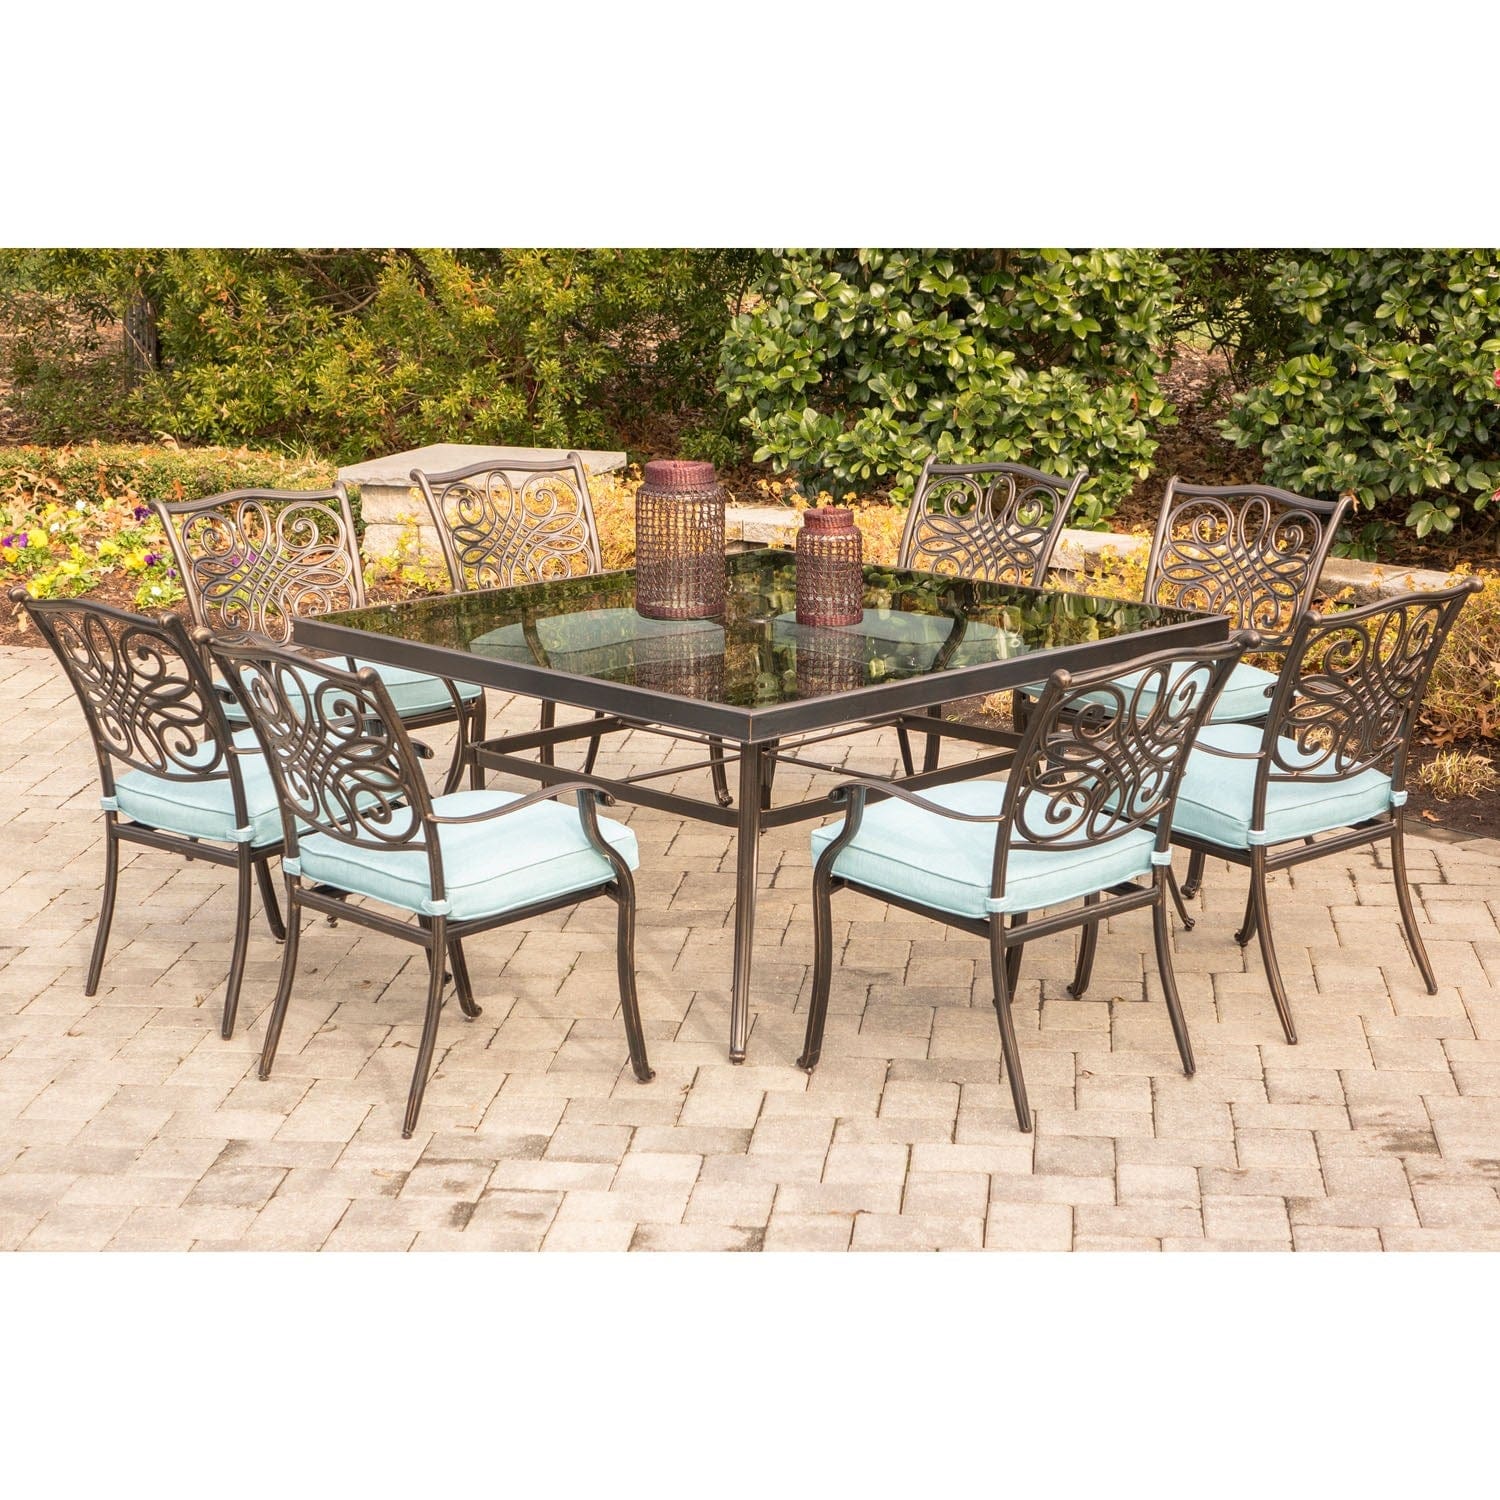 Hanover Outdoor Dining Set Hanover - Traditions 9-Piece Dining Set in Blue with 60 In. Square Glass-Top Dining Table | TRADDN9PCSQG-BLU